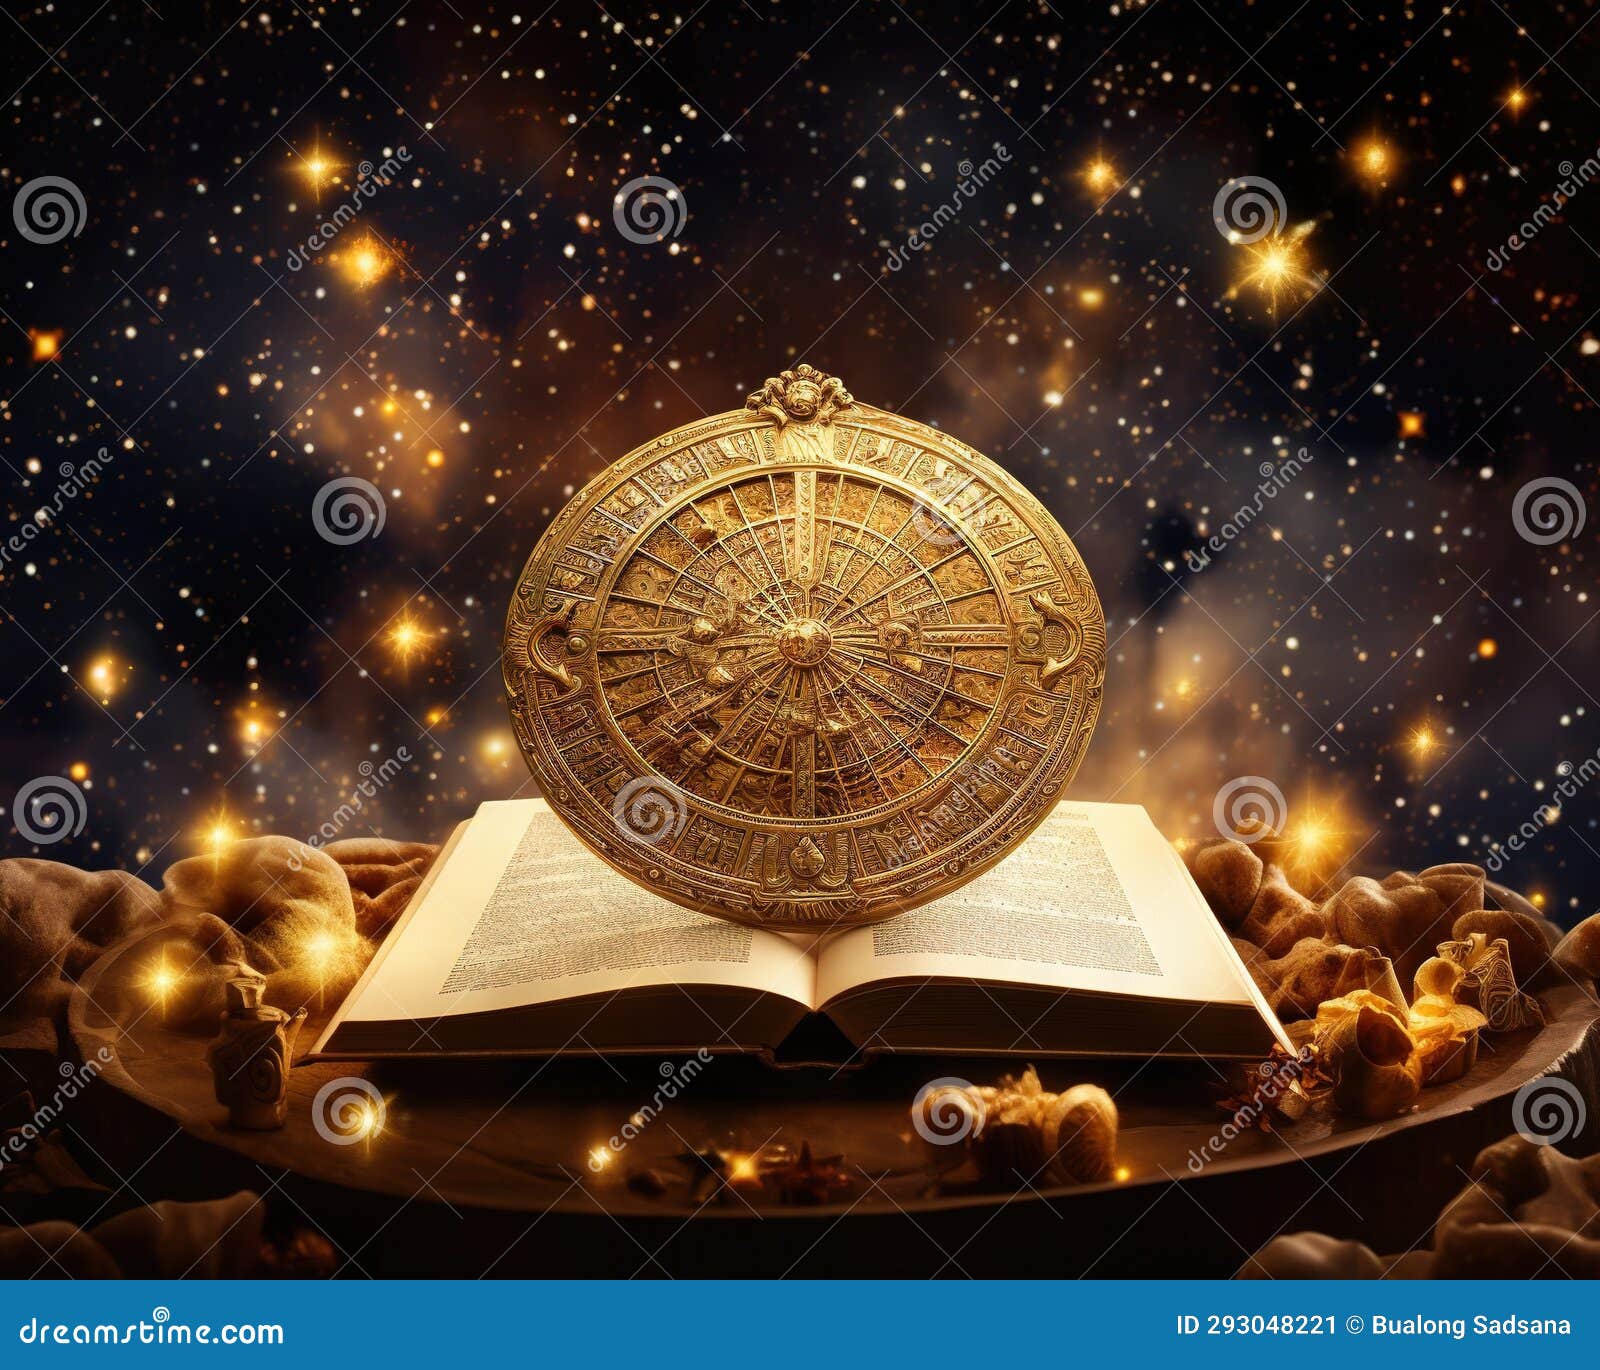 the zodiac sign of libro gold has scales and stars on the night sky.